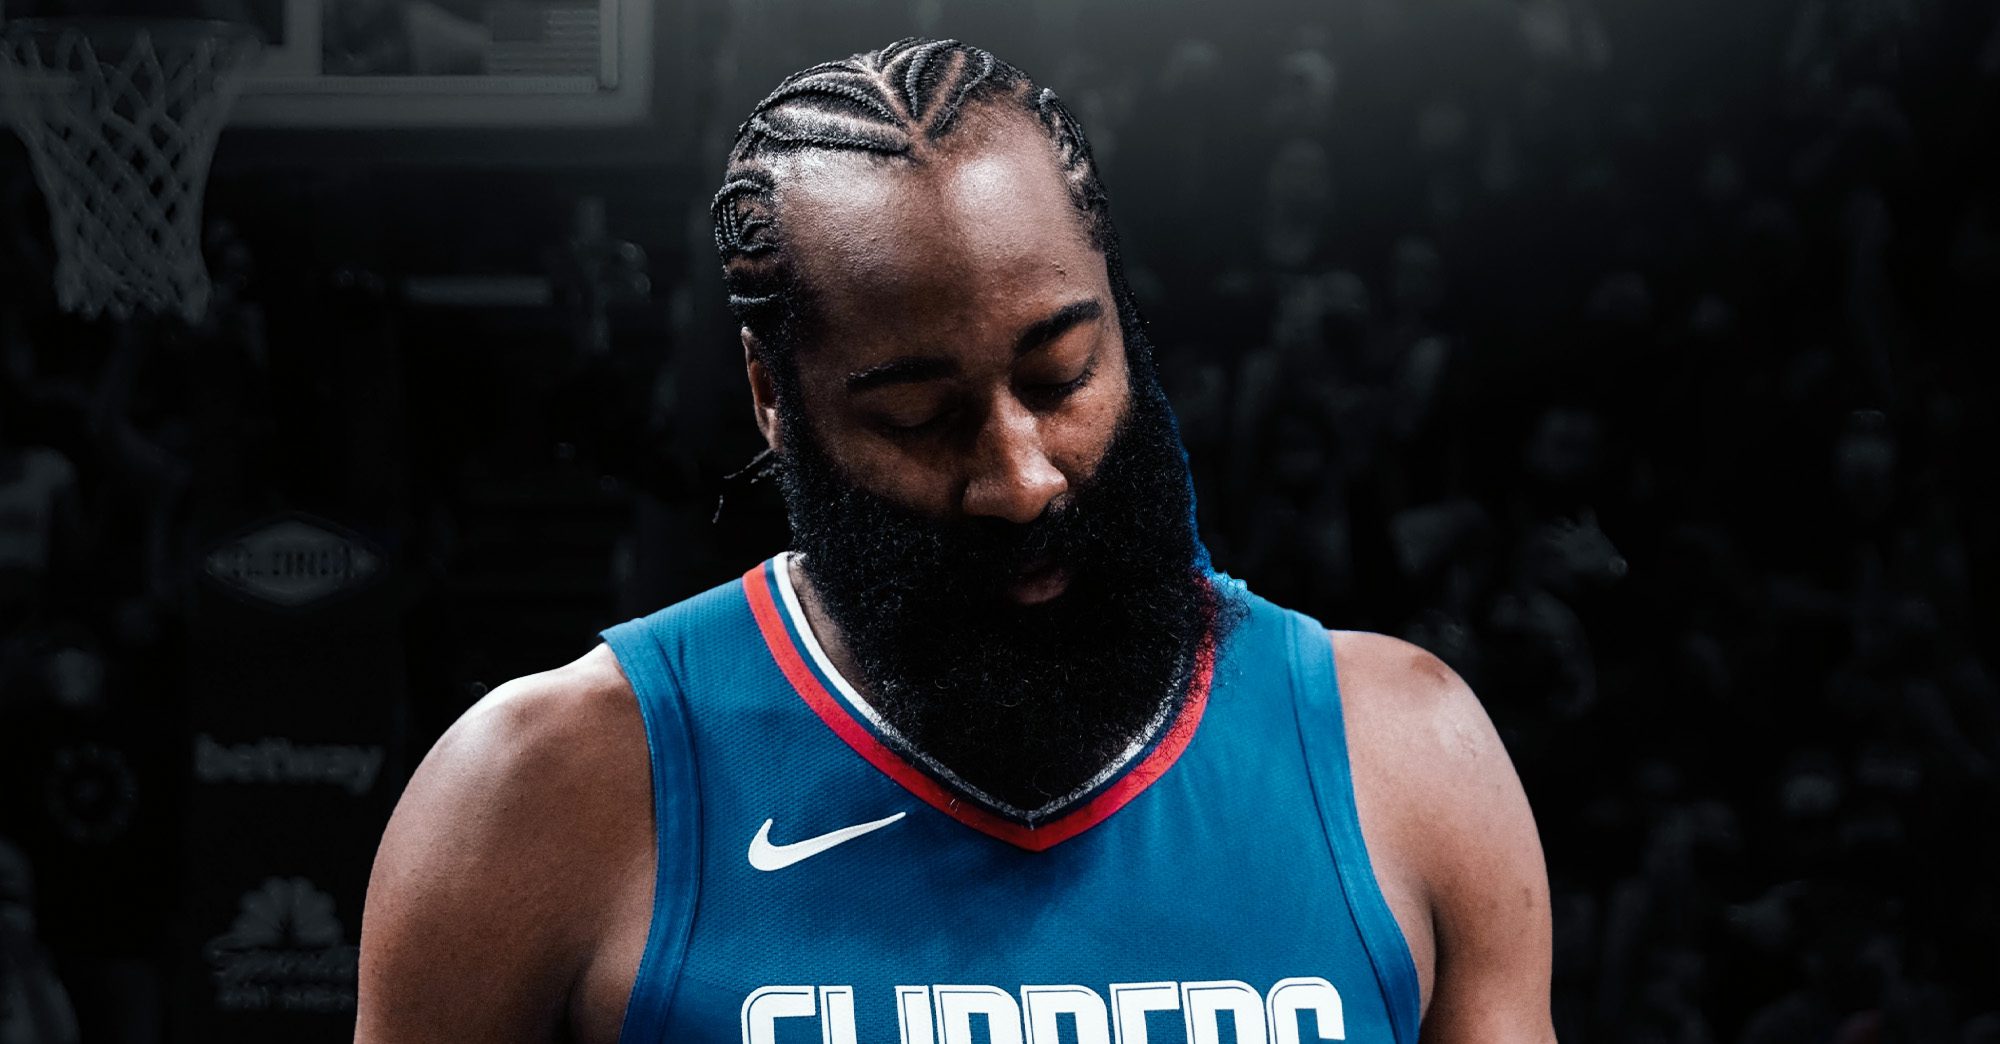 James Harden Responds to Rocky 0-2 Start With Clippers